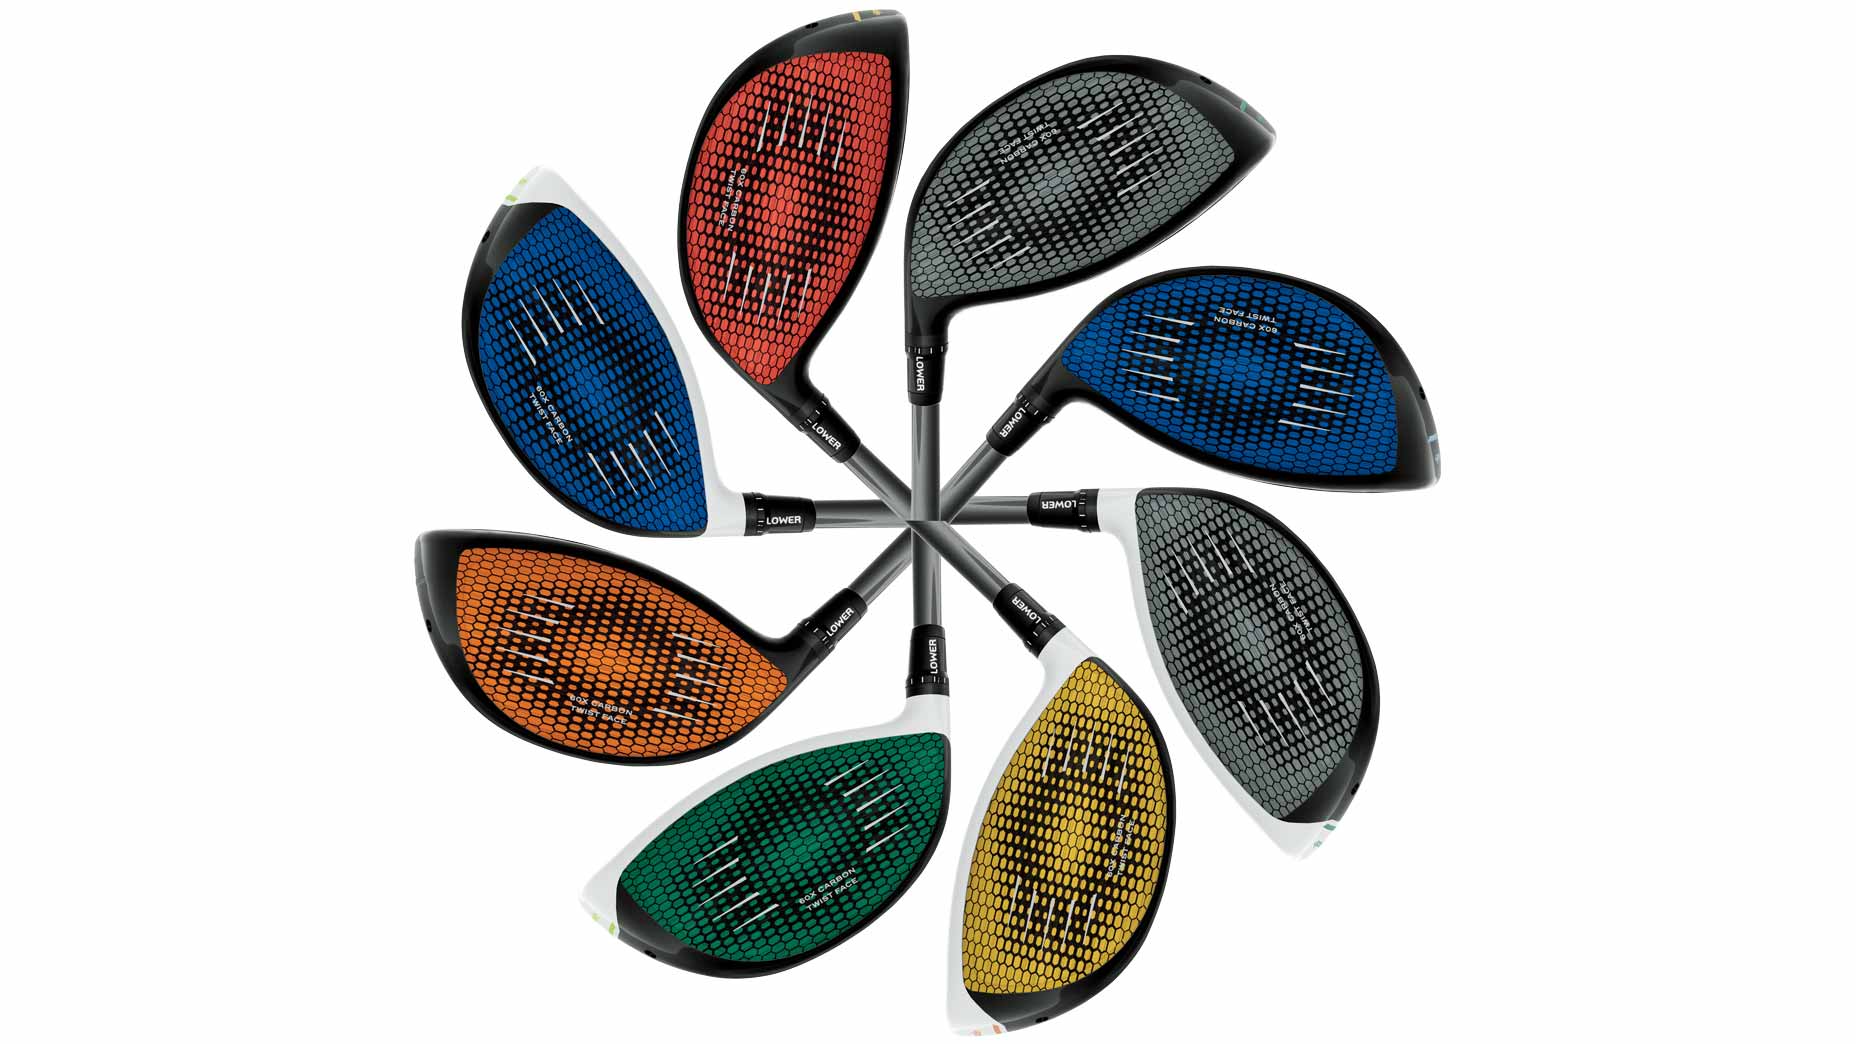 Colored faces of TaylorMade Stealth drivers